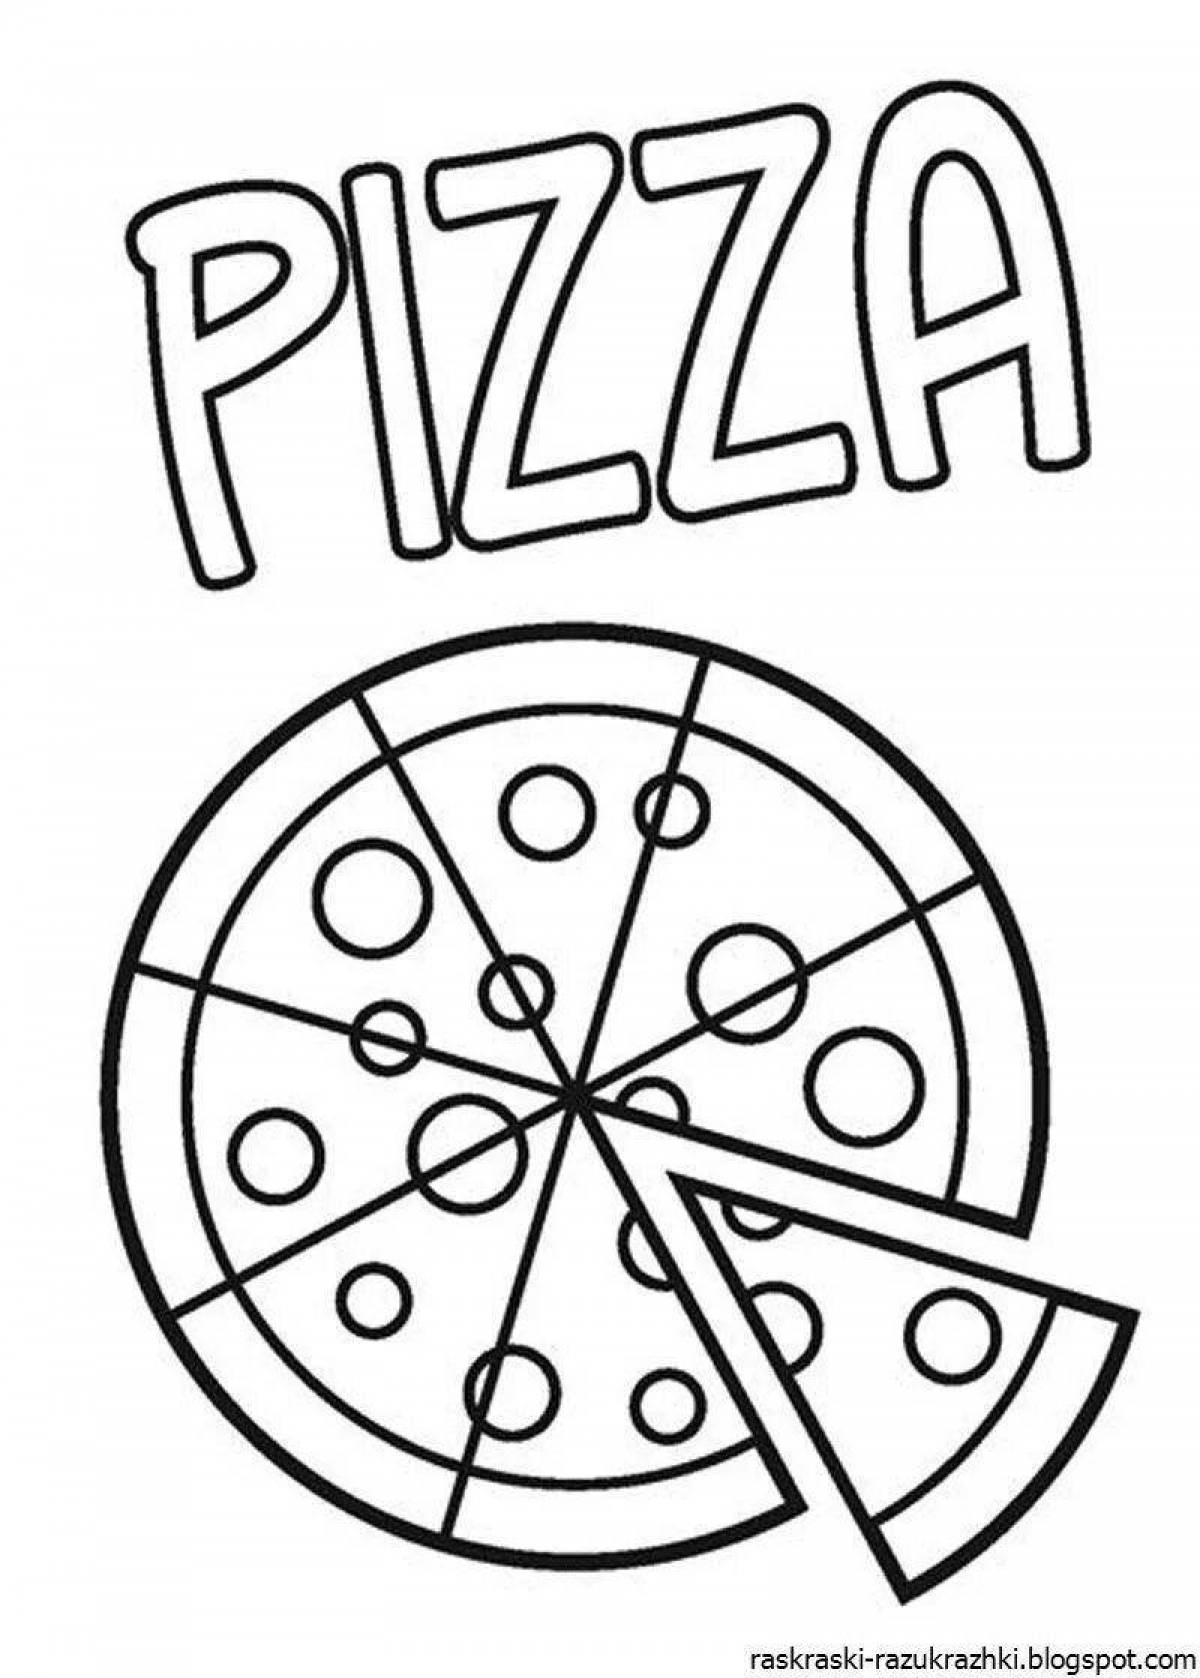 Coloring pizza thank you